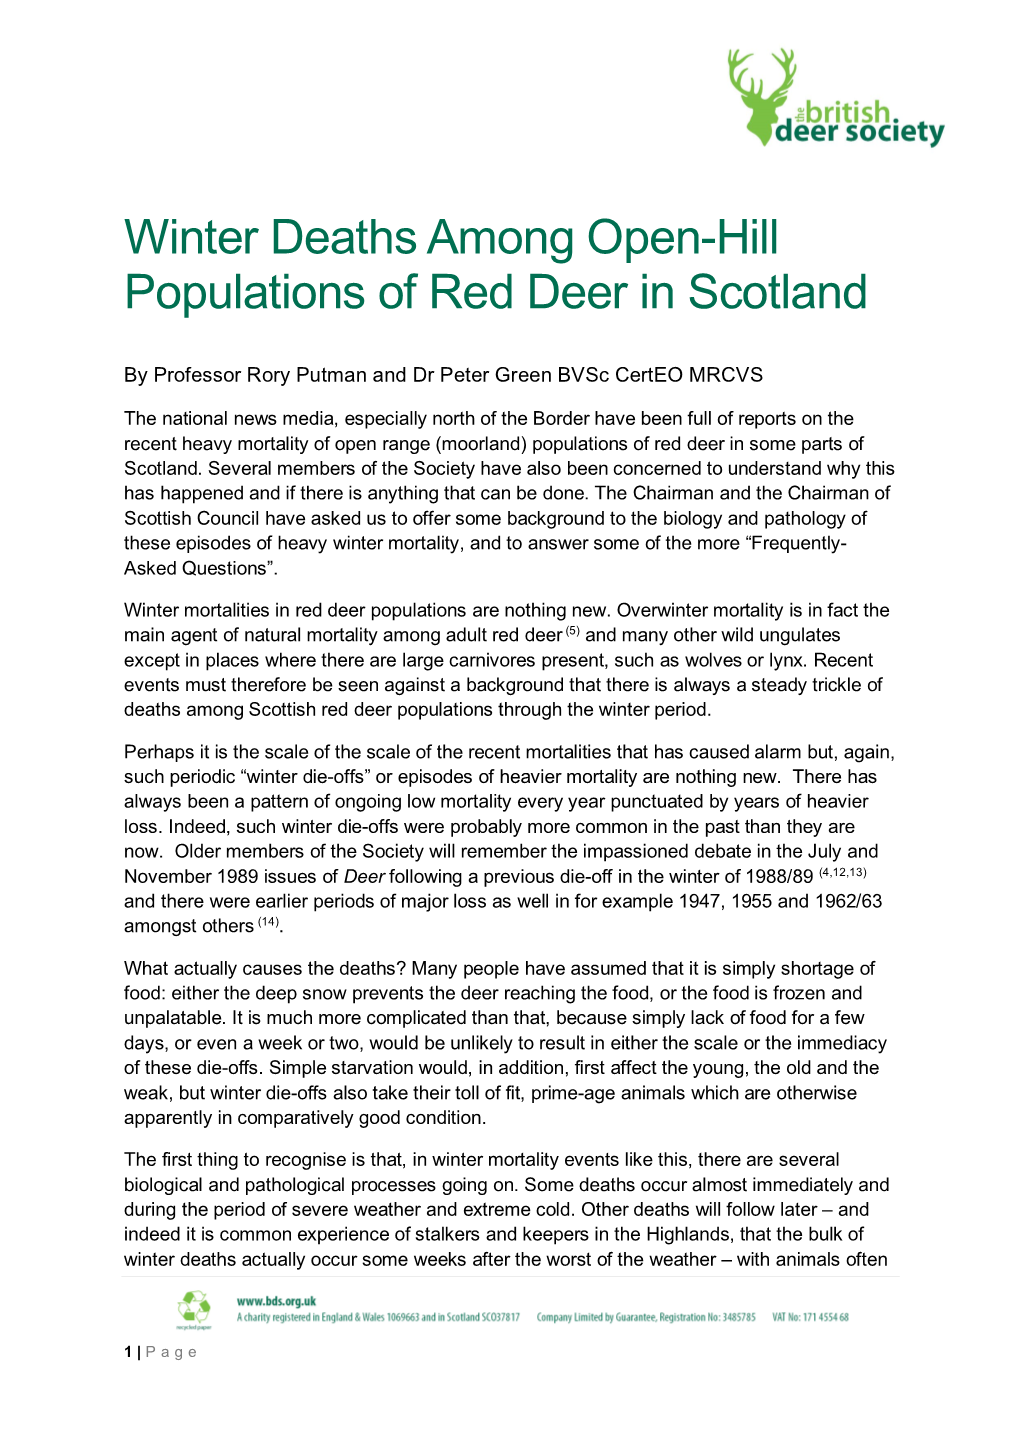 Winter Deaths Among Open-Hill Populations of Red Deer in Scotland